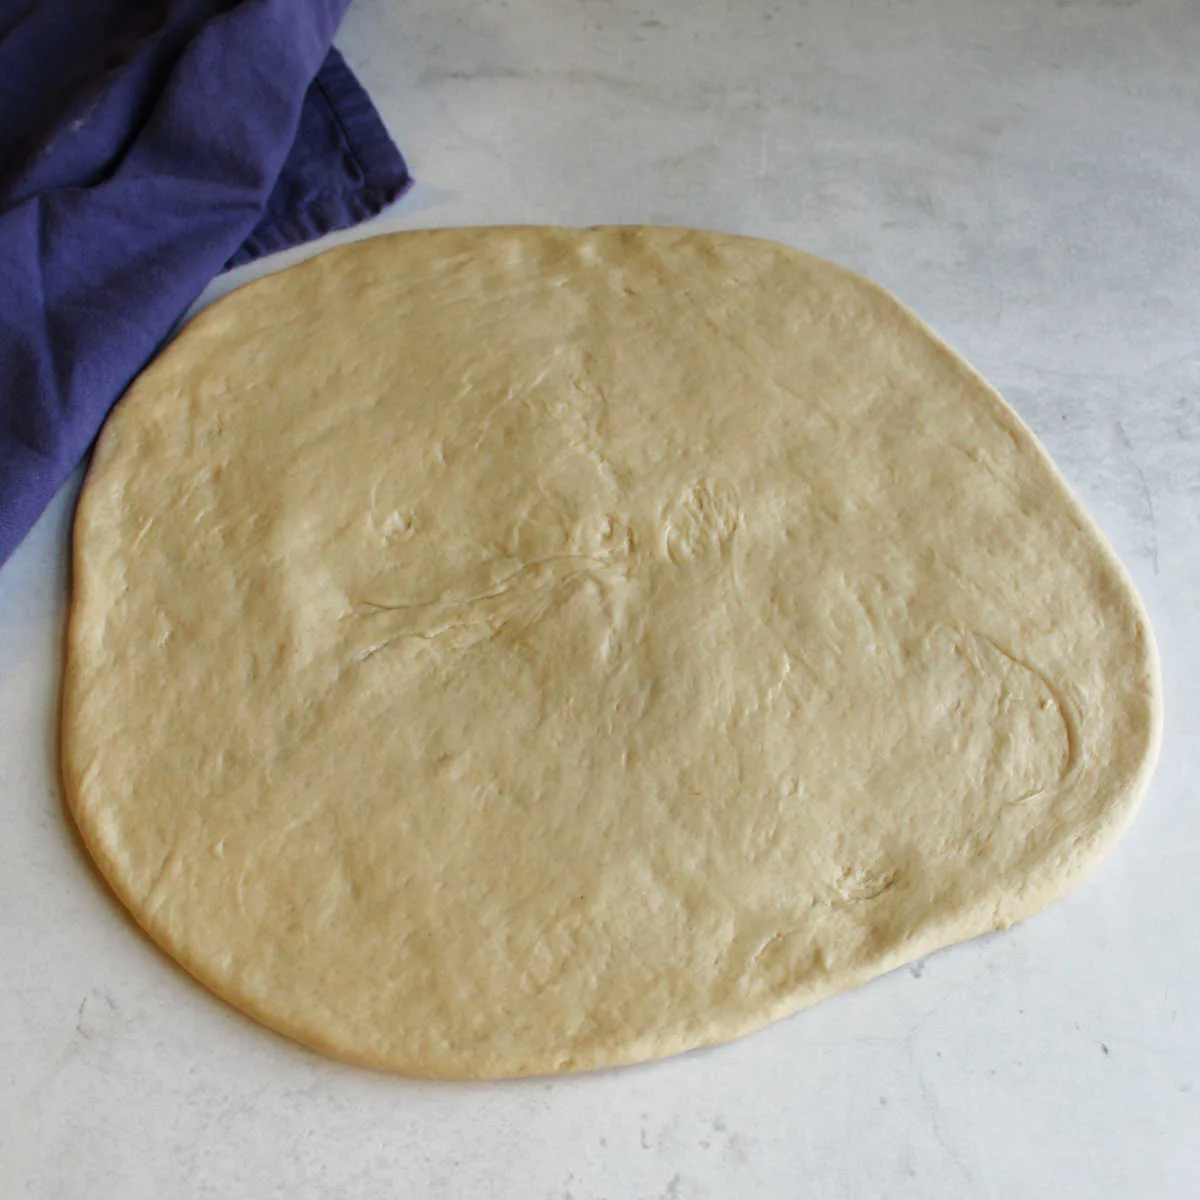 Circle of sourdough pizza dough ready to be topped and cooked.